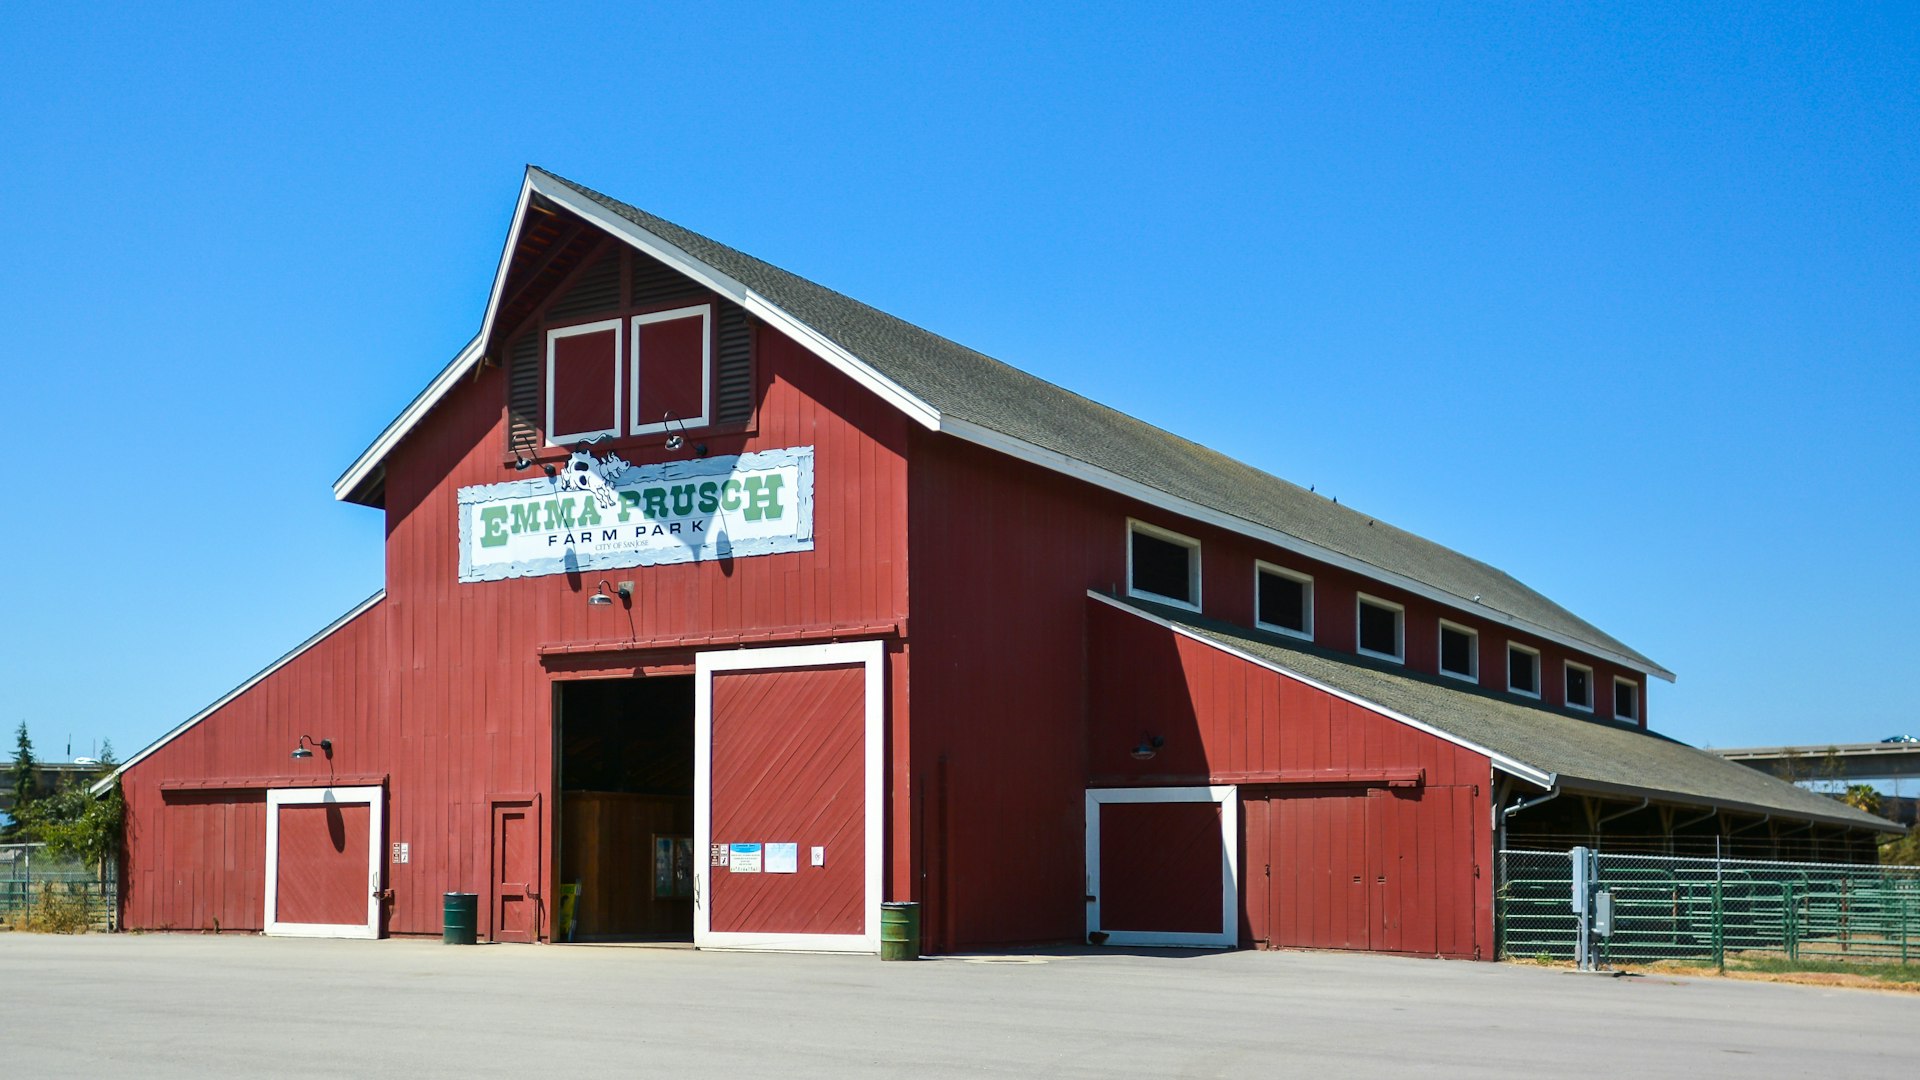 A large red wooden barn building with a sign outside that reads "Emma Prusch Farm Park"